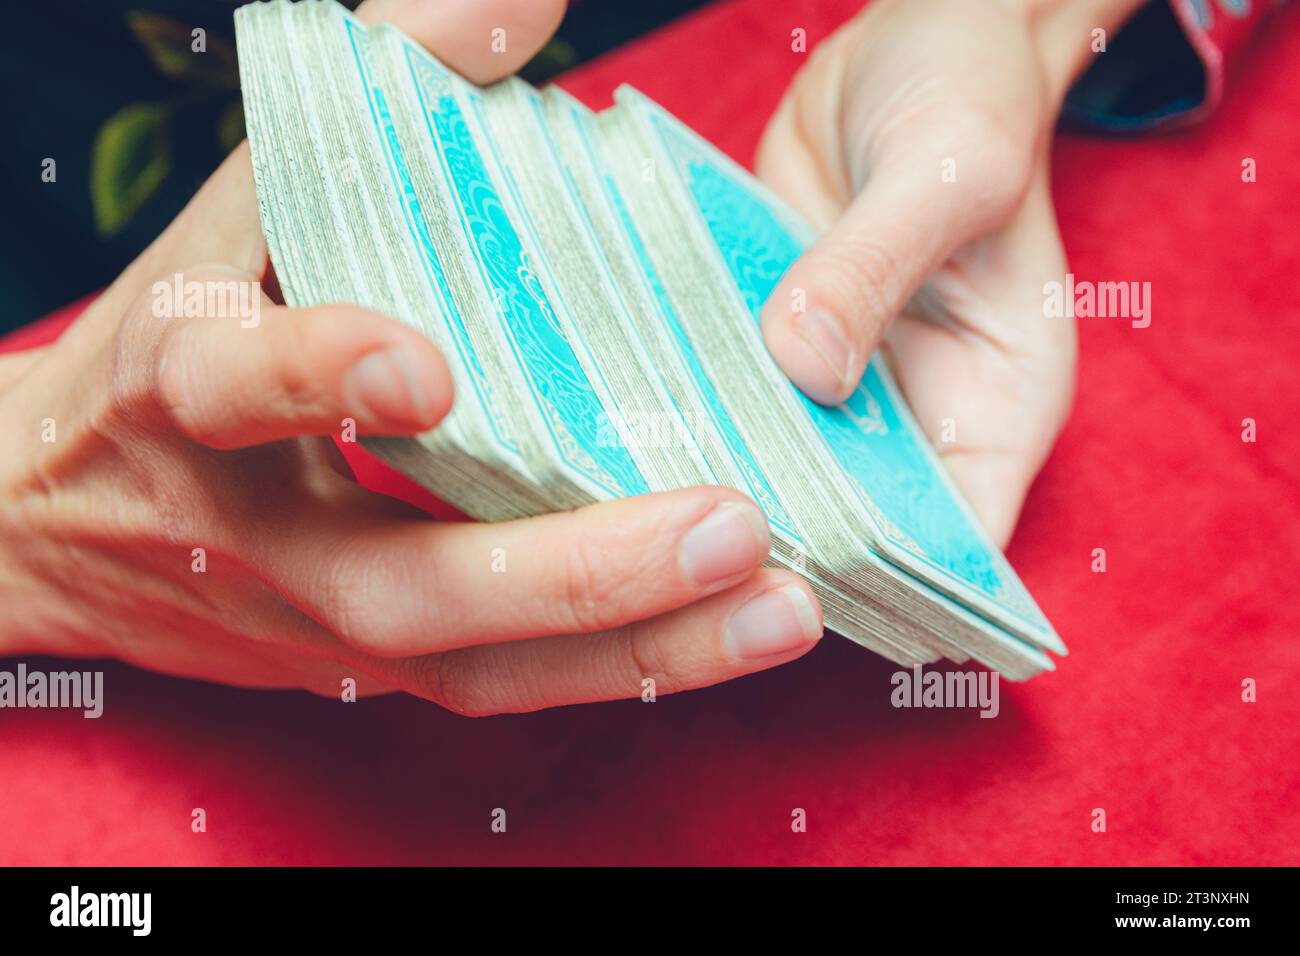 Close-up of hands of unrecognizable young Caucasian tarot reader woman mixing blue tarot cards on table with red tablecloth. Stock Photo